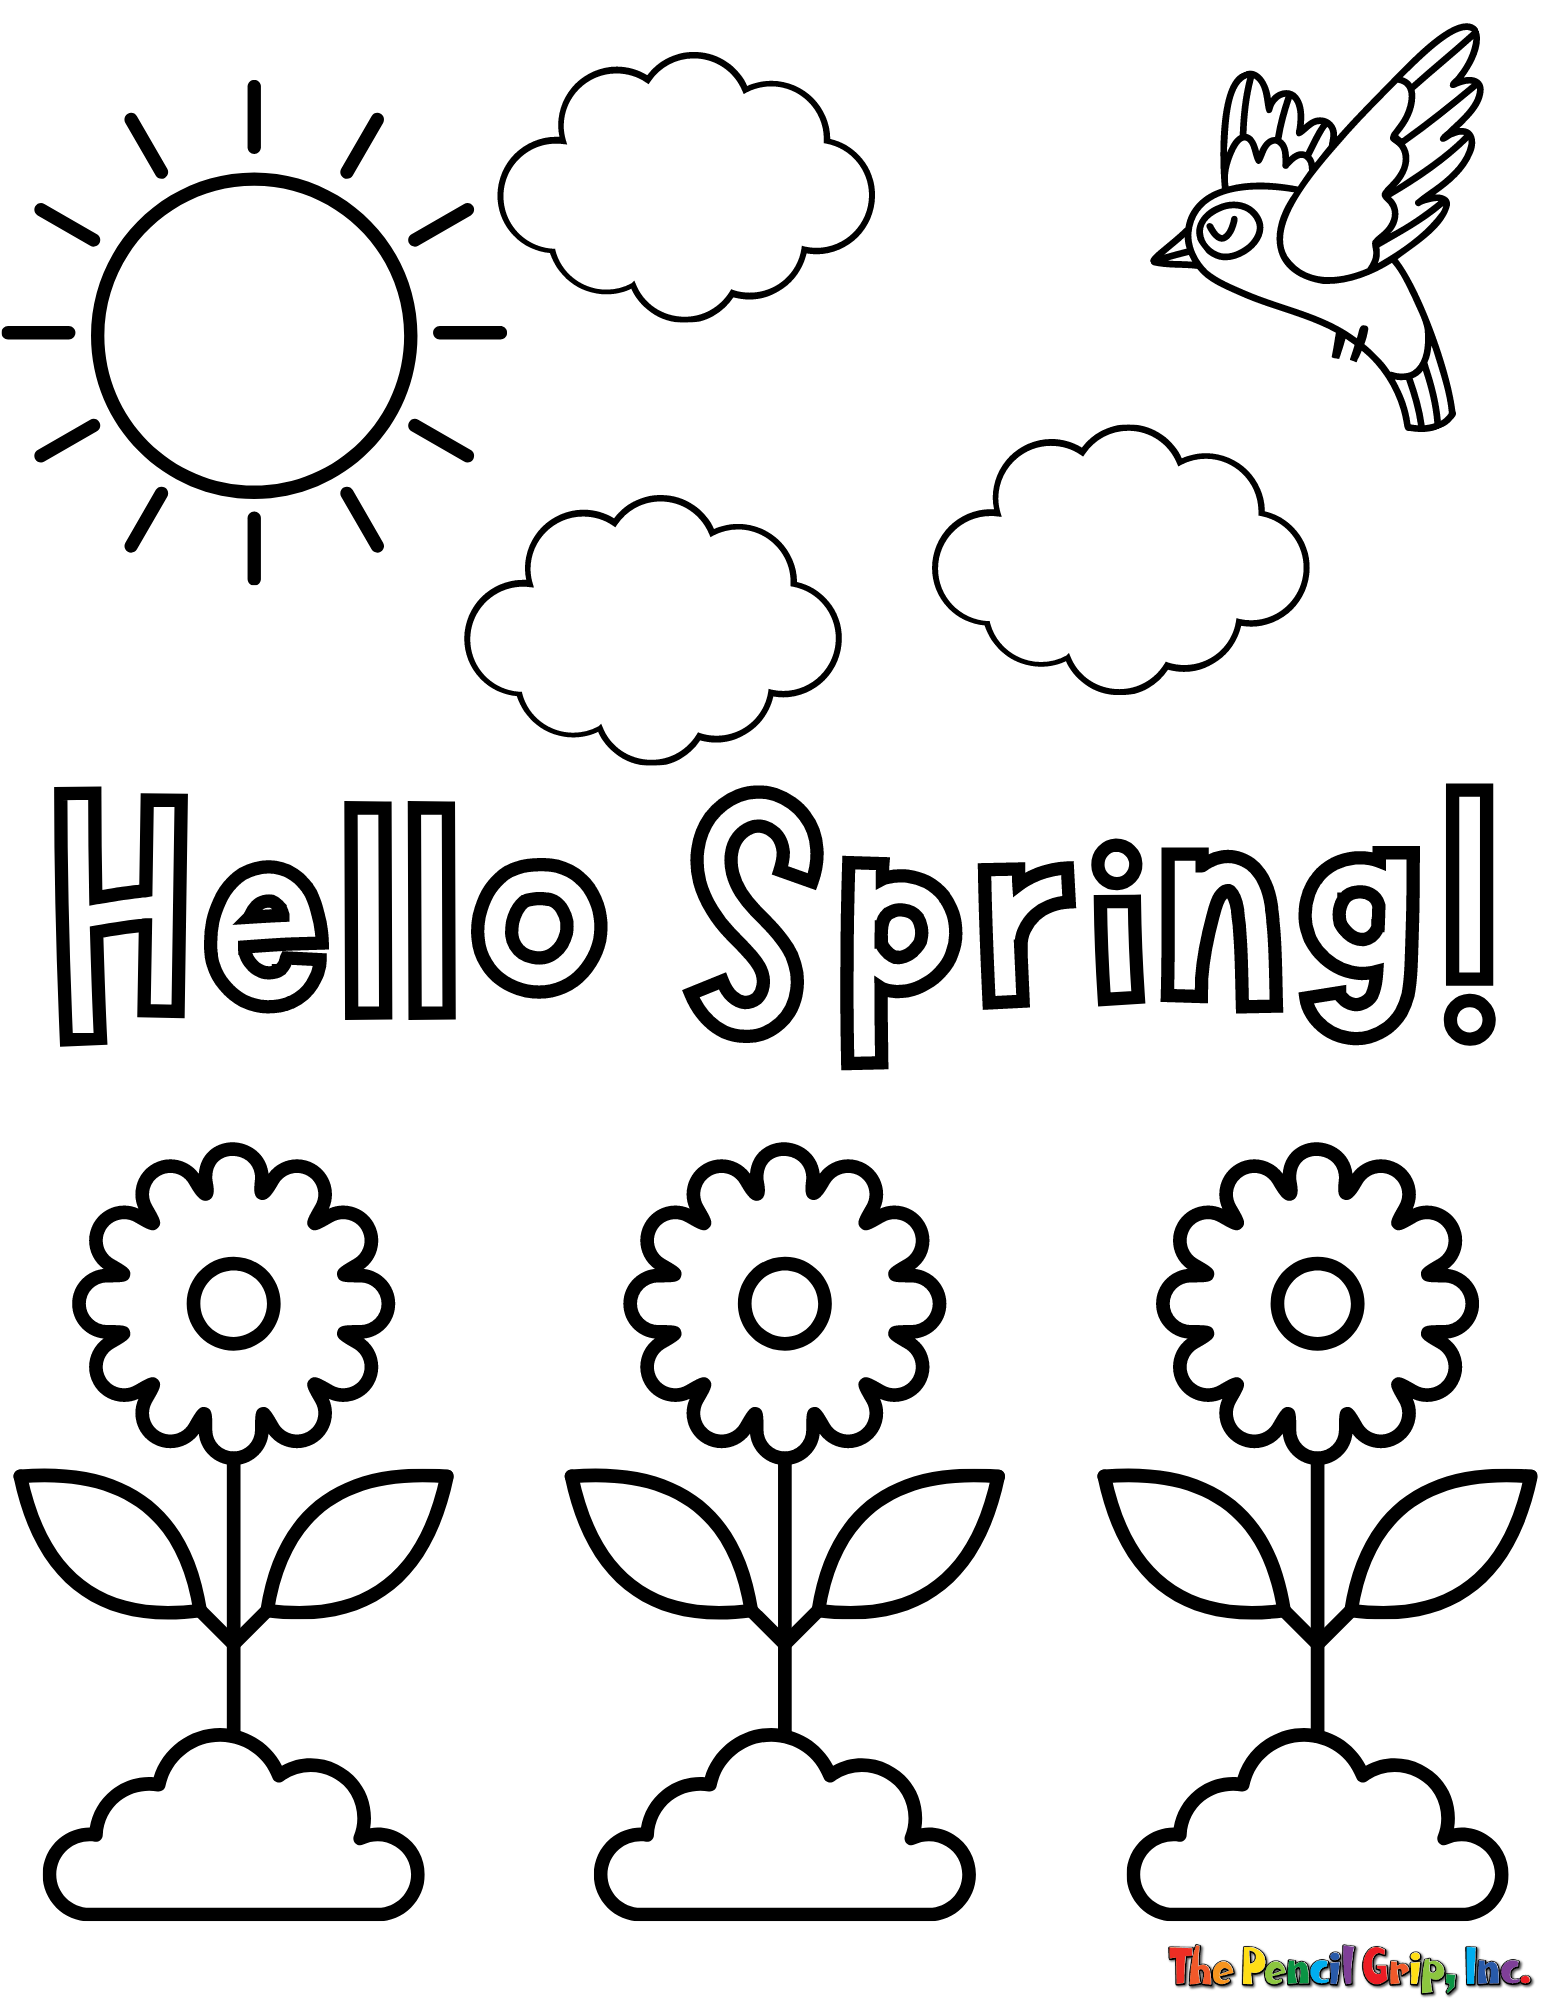 Free downloadable spring coloring sheets â the pencil grip inc